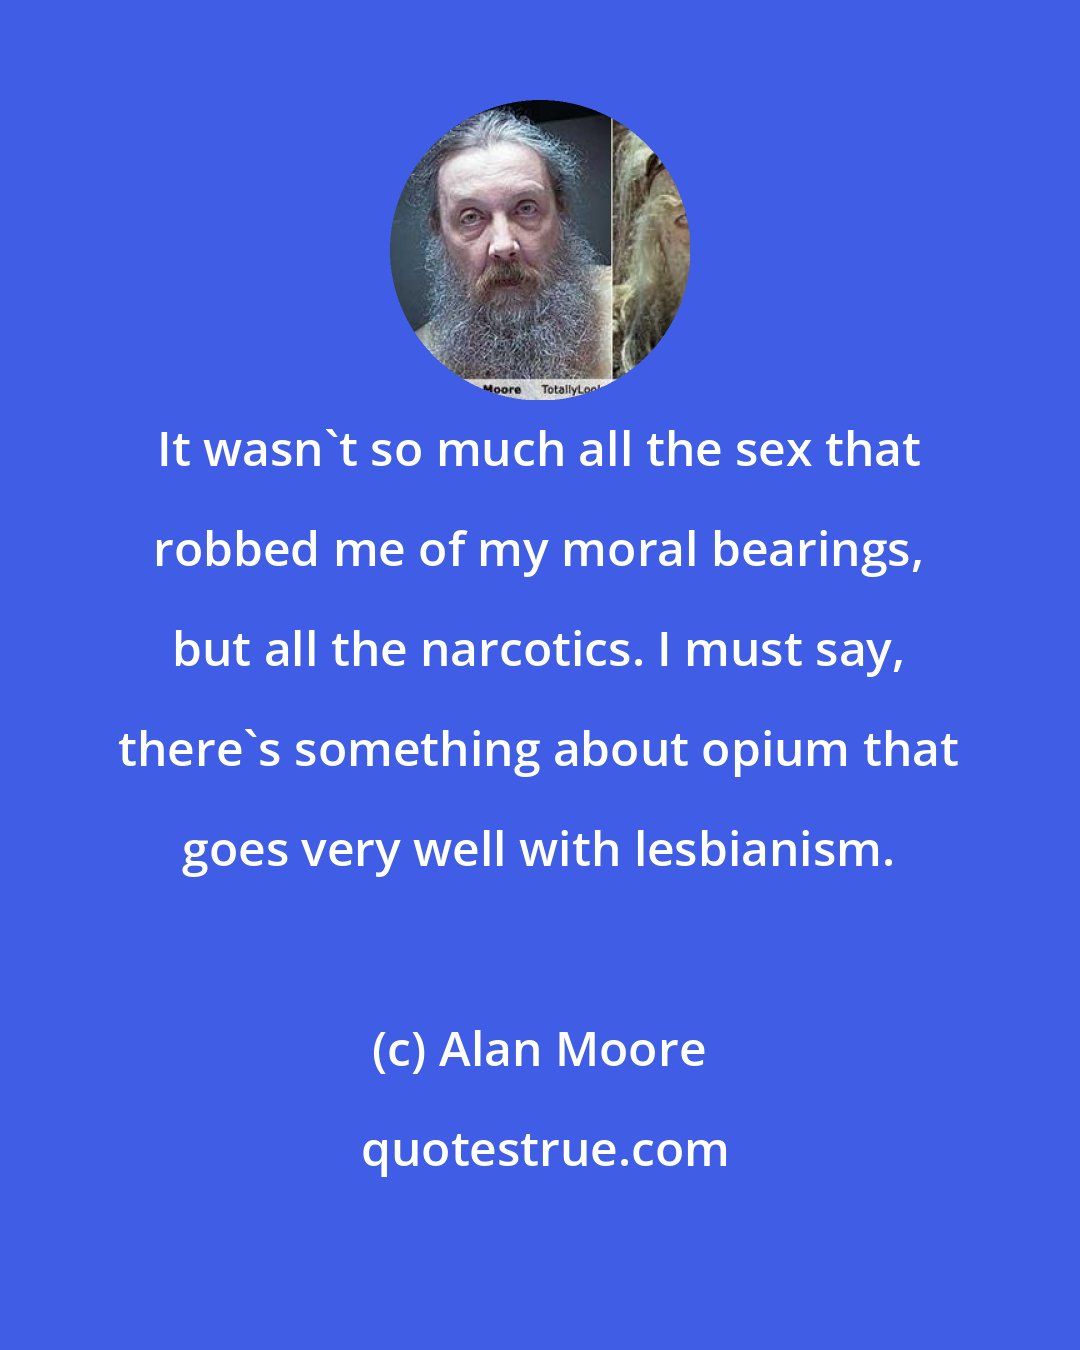 Alan Moore: It wasn't so much all the sex that robbed me of my moral bearings, but all the narcotics. I must say, there's something about opium that goes very well with lesbianism.